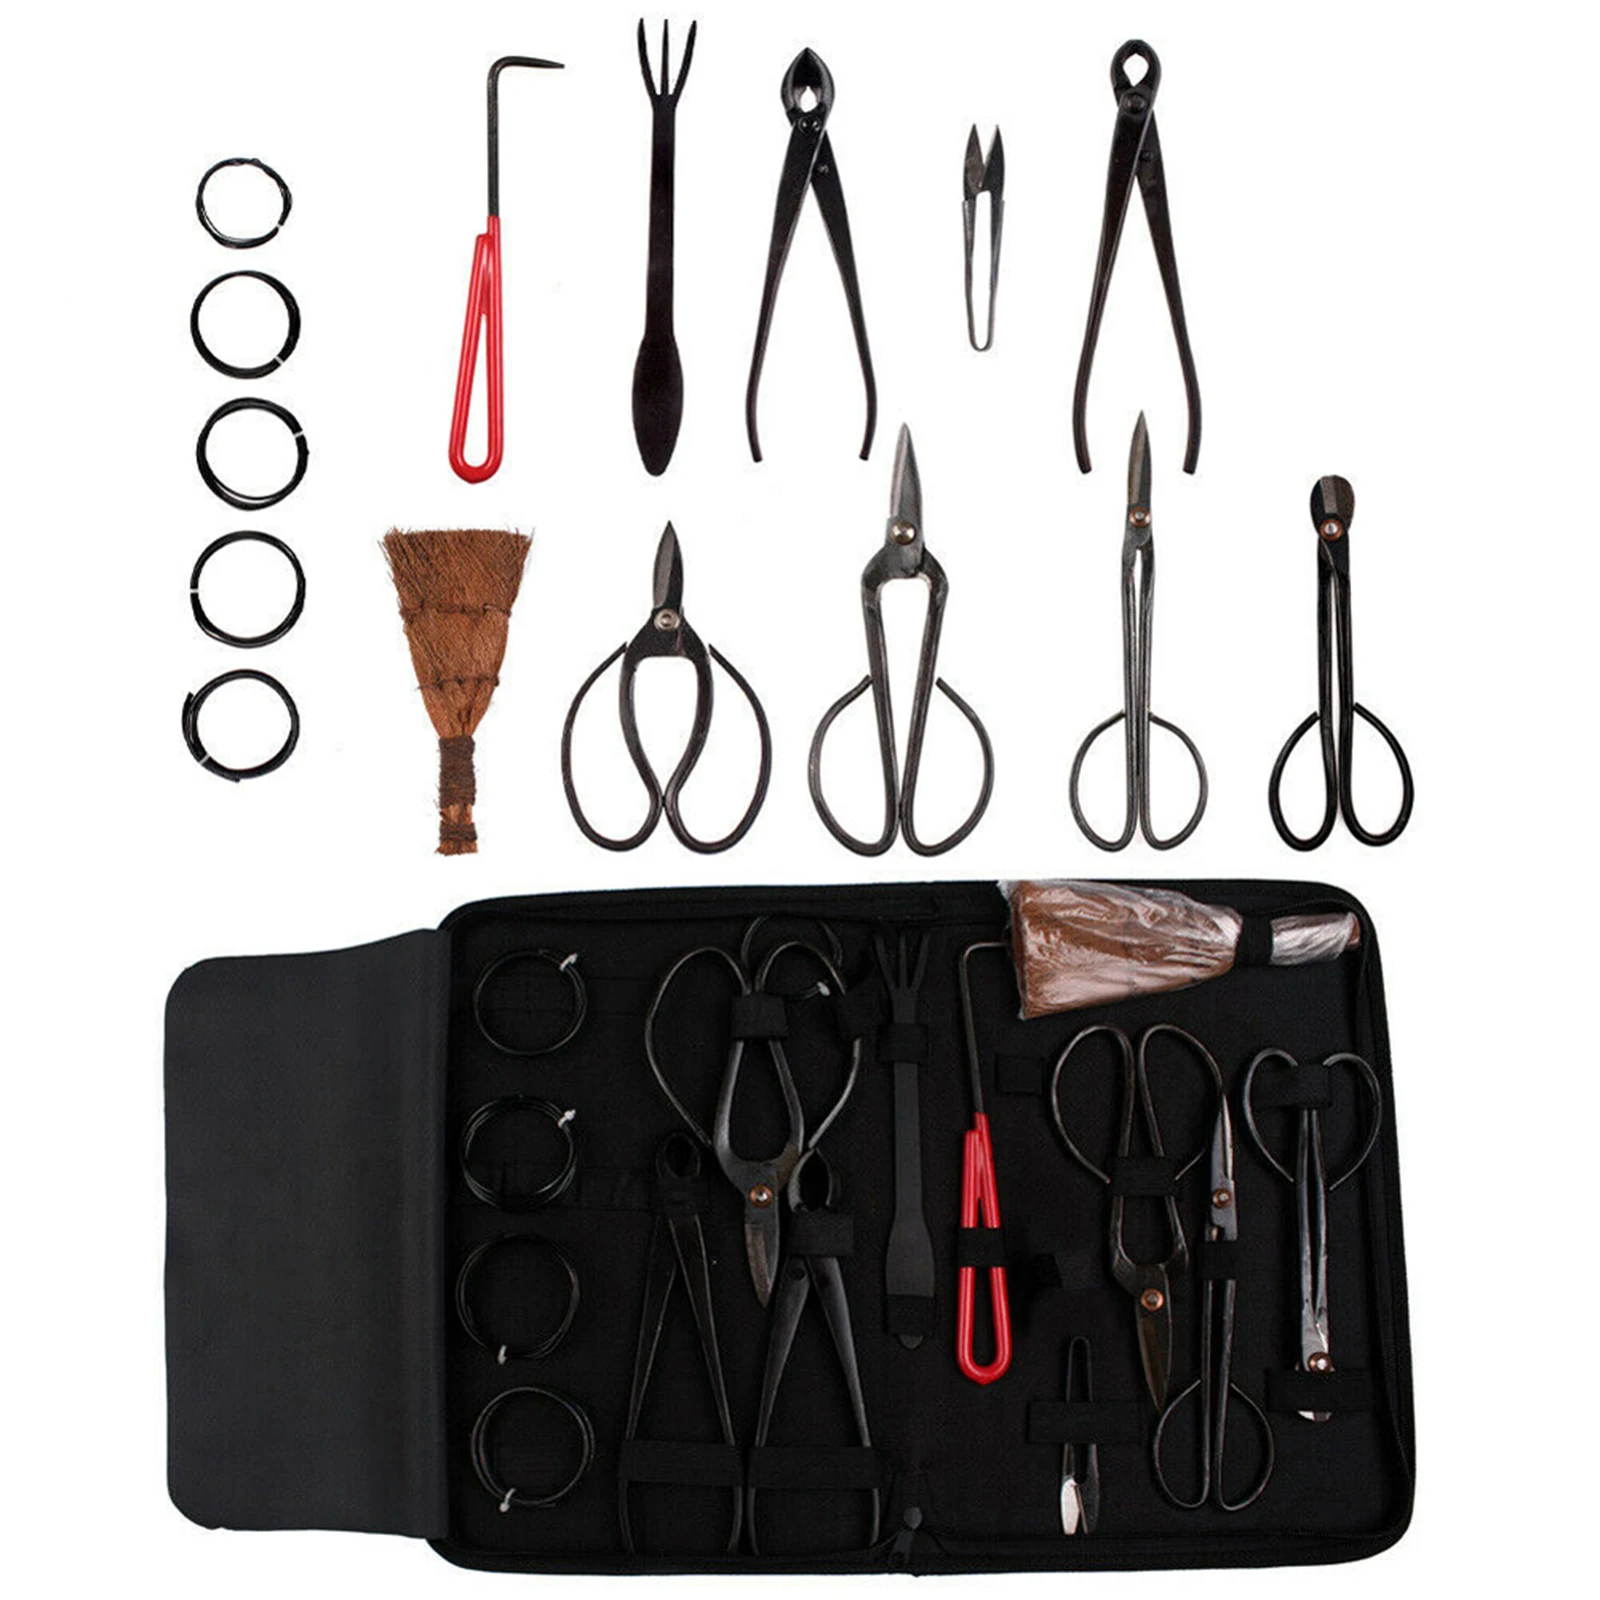 Hot Sale NEW Garden Bonsai Tool Set 15pcs Carbon Steel Kit Cutter Scissors With Nylon Case Outdoor Shackle for Camping qtoe Drop